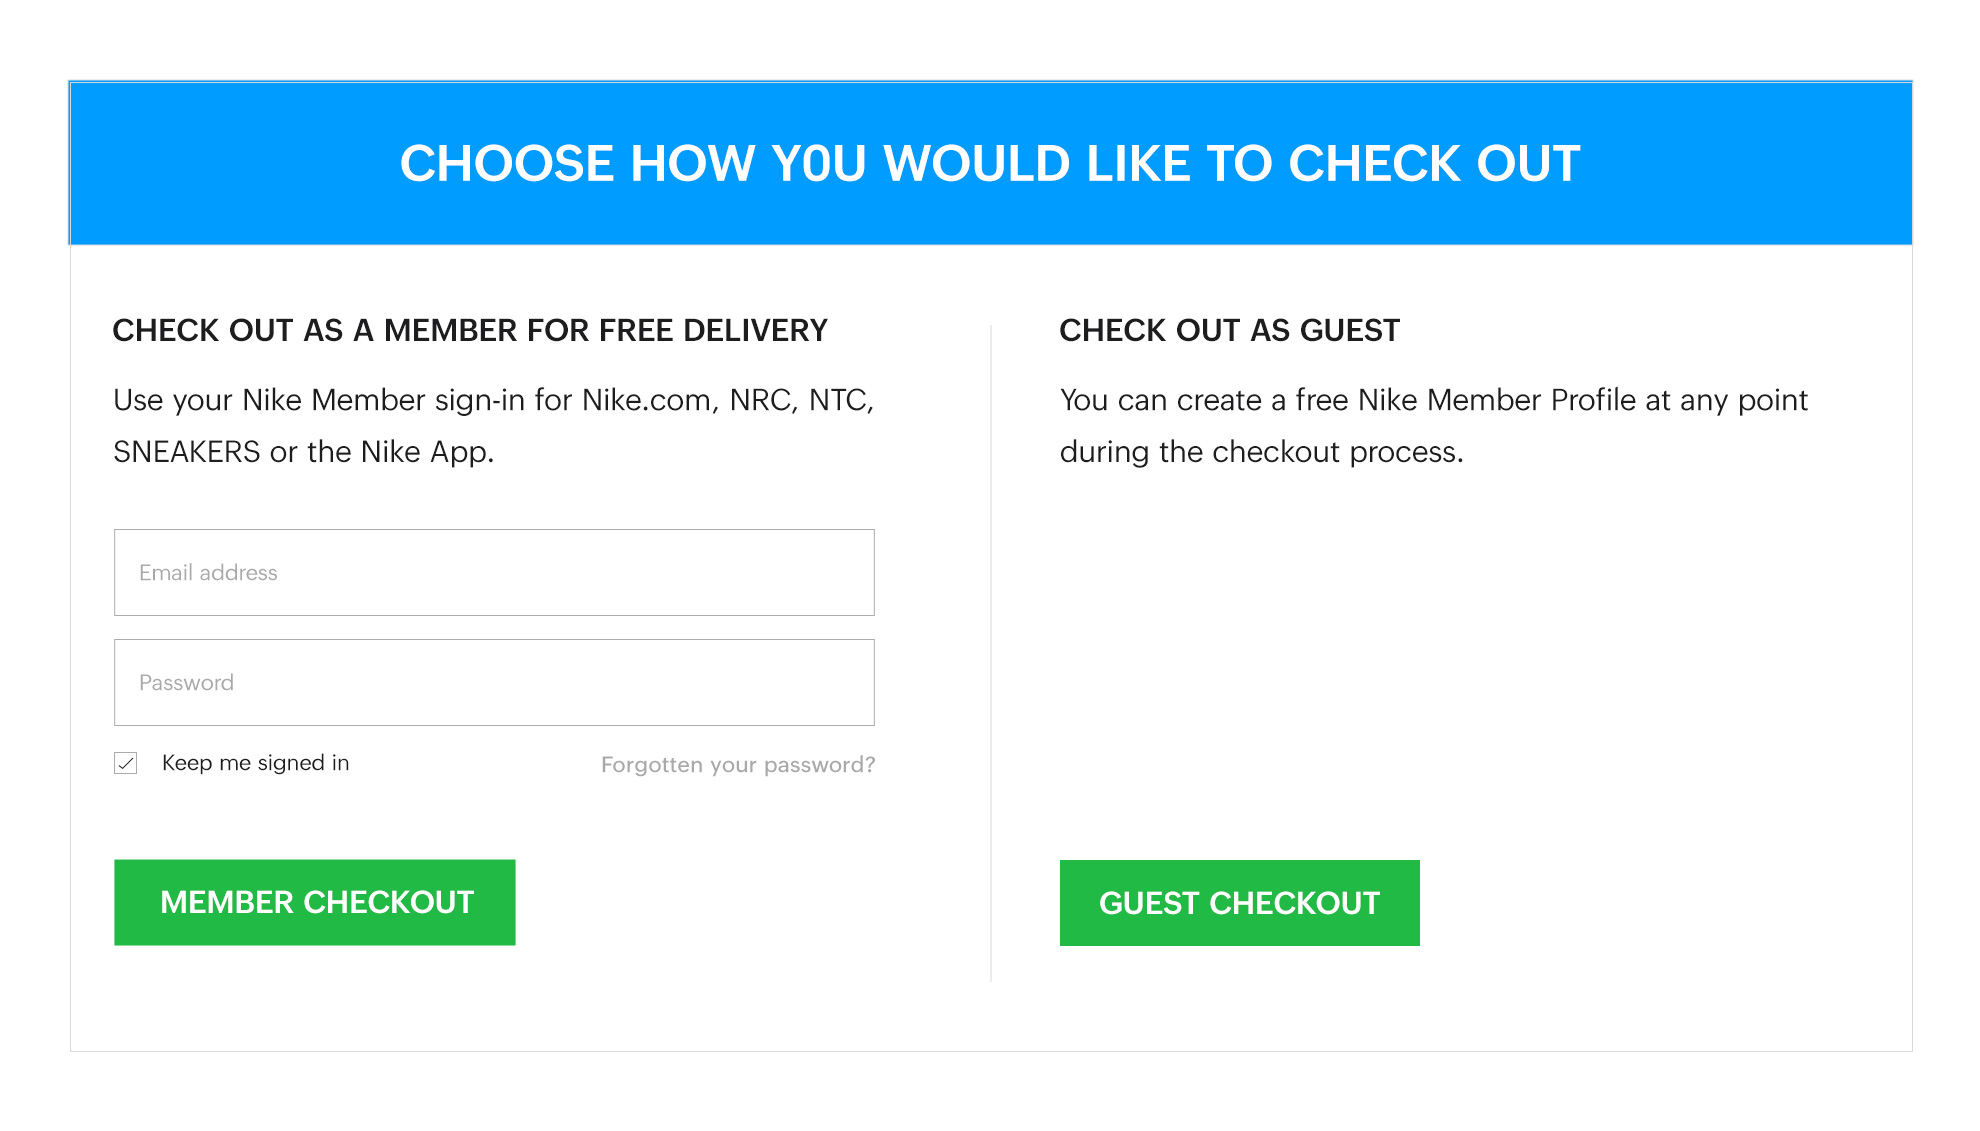 User-friendly form design to enhance your checkout experience